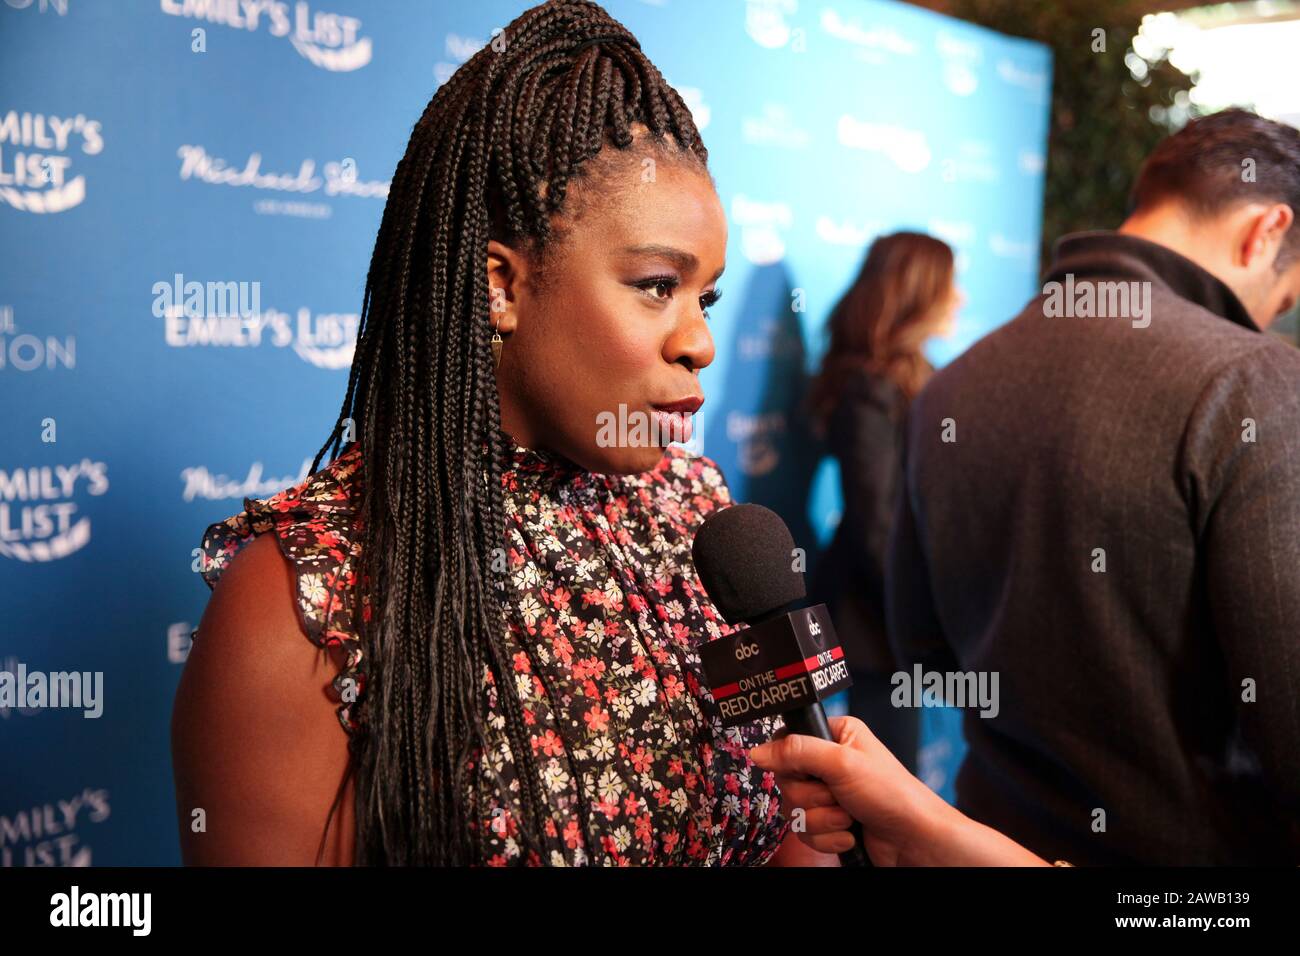 Actor Uzo Aduba attends EMILY’s List Pre-Oscars panel discussion titled “Defining Women” on February 4th, 2020 in Los Angeles, California. Stock Photo